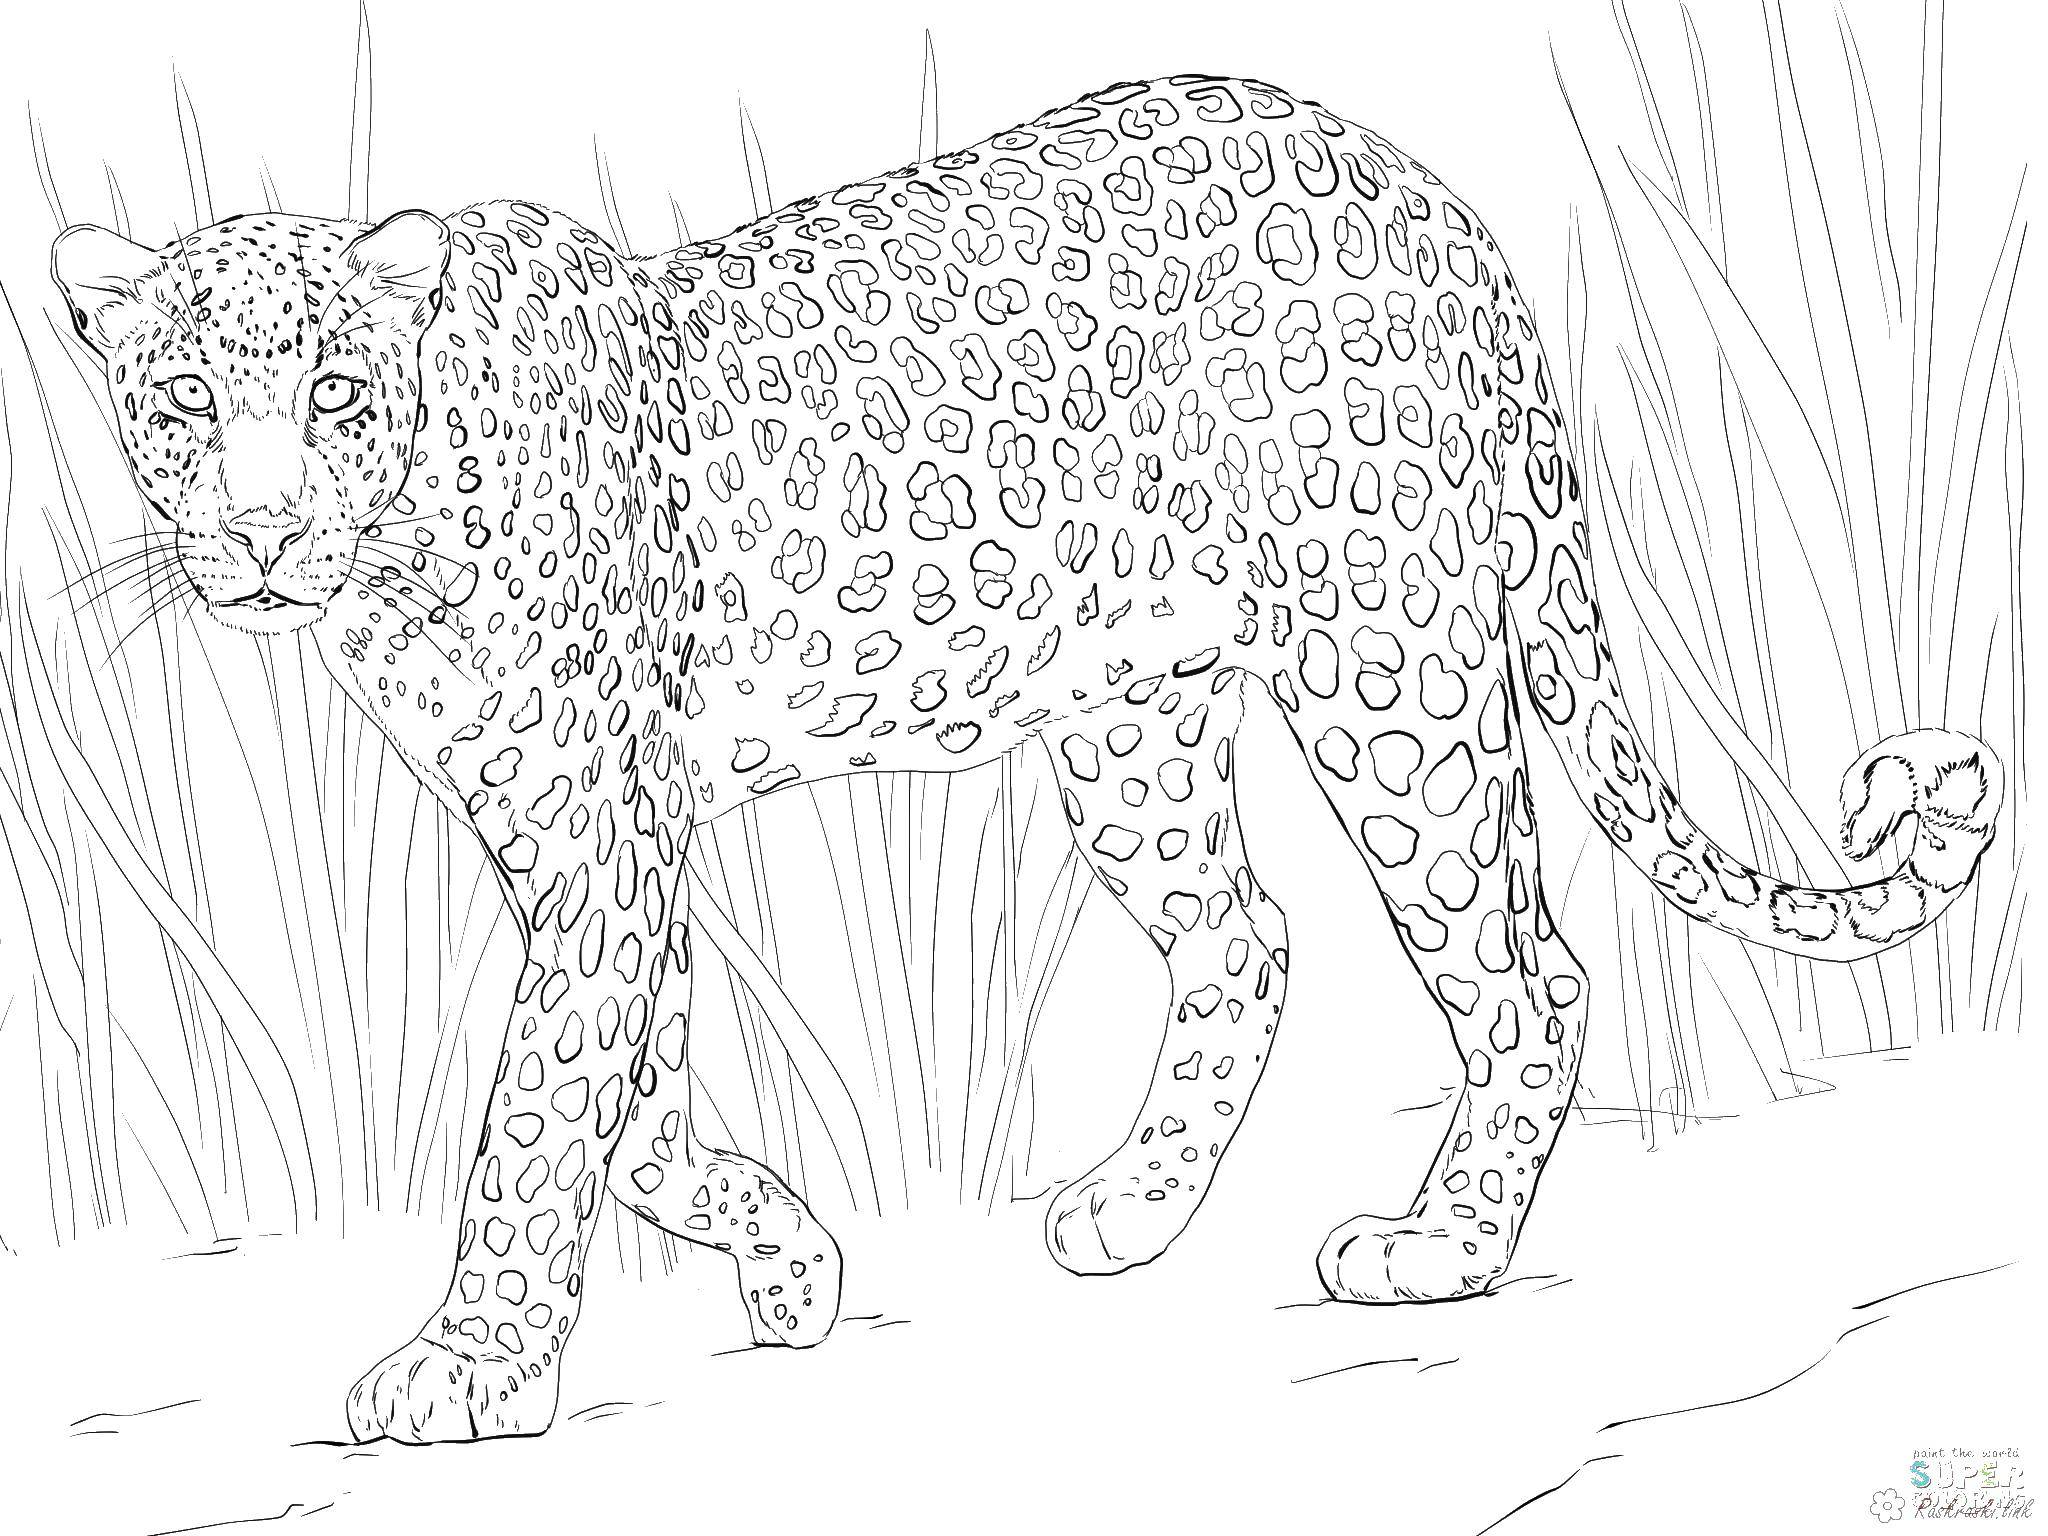 Coloring Spotted leopard. Category wild animals. Tags:  leopard.